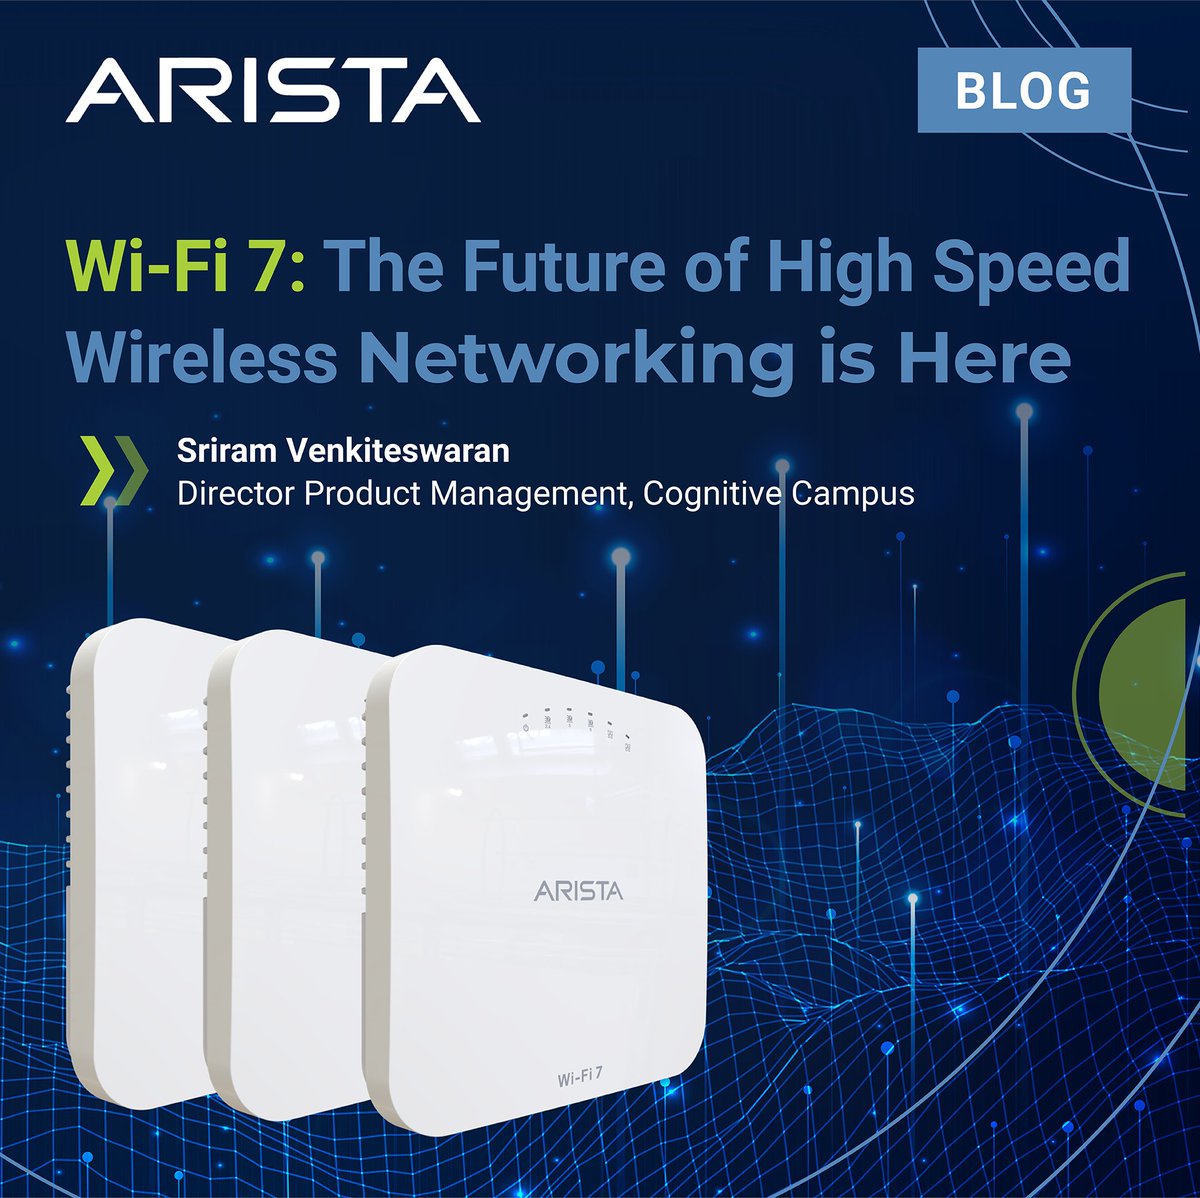 Arista is taking the next step in the evolution of Wi-Fi by introducing a Wi-Fi 7 access point, the C-460, built on the Qualcomm Networking Pro 1220 platform. To learn more check out Sriram Venkiteswaran's blog: bit.ly/3JshyRE #wifi #wifi7